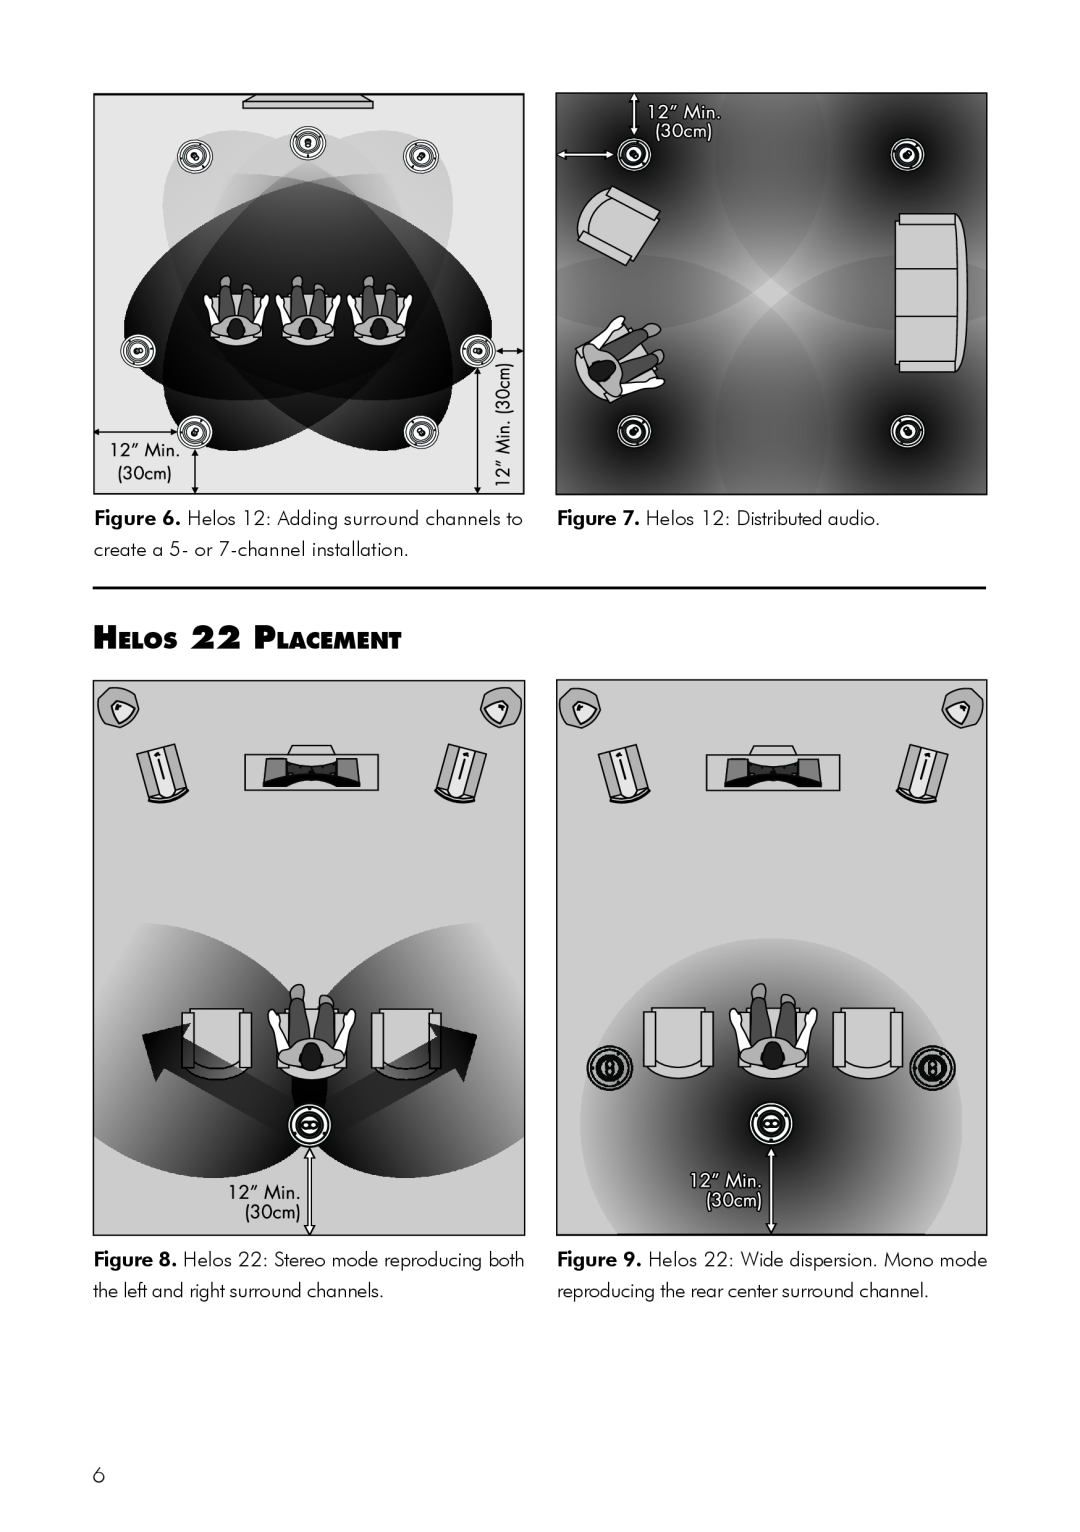 MartinLogan user manual Helos 22 Placement, Helos 12 Adding surround channels to, Helos 12 Distributed audio 